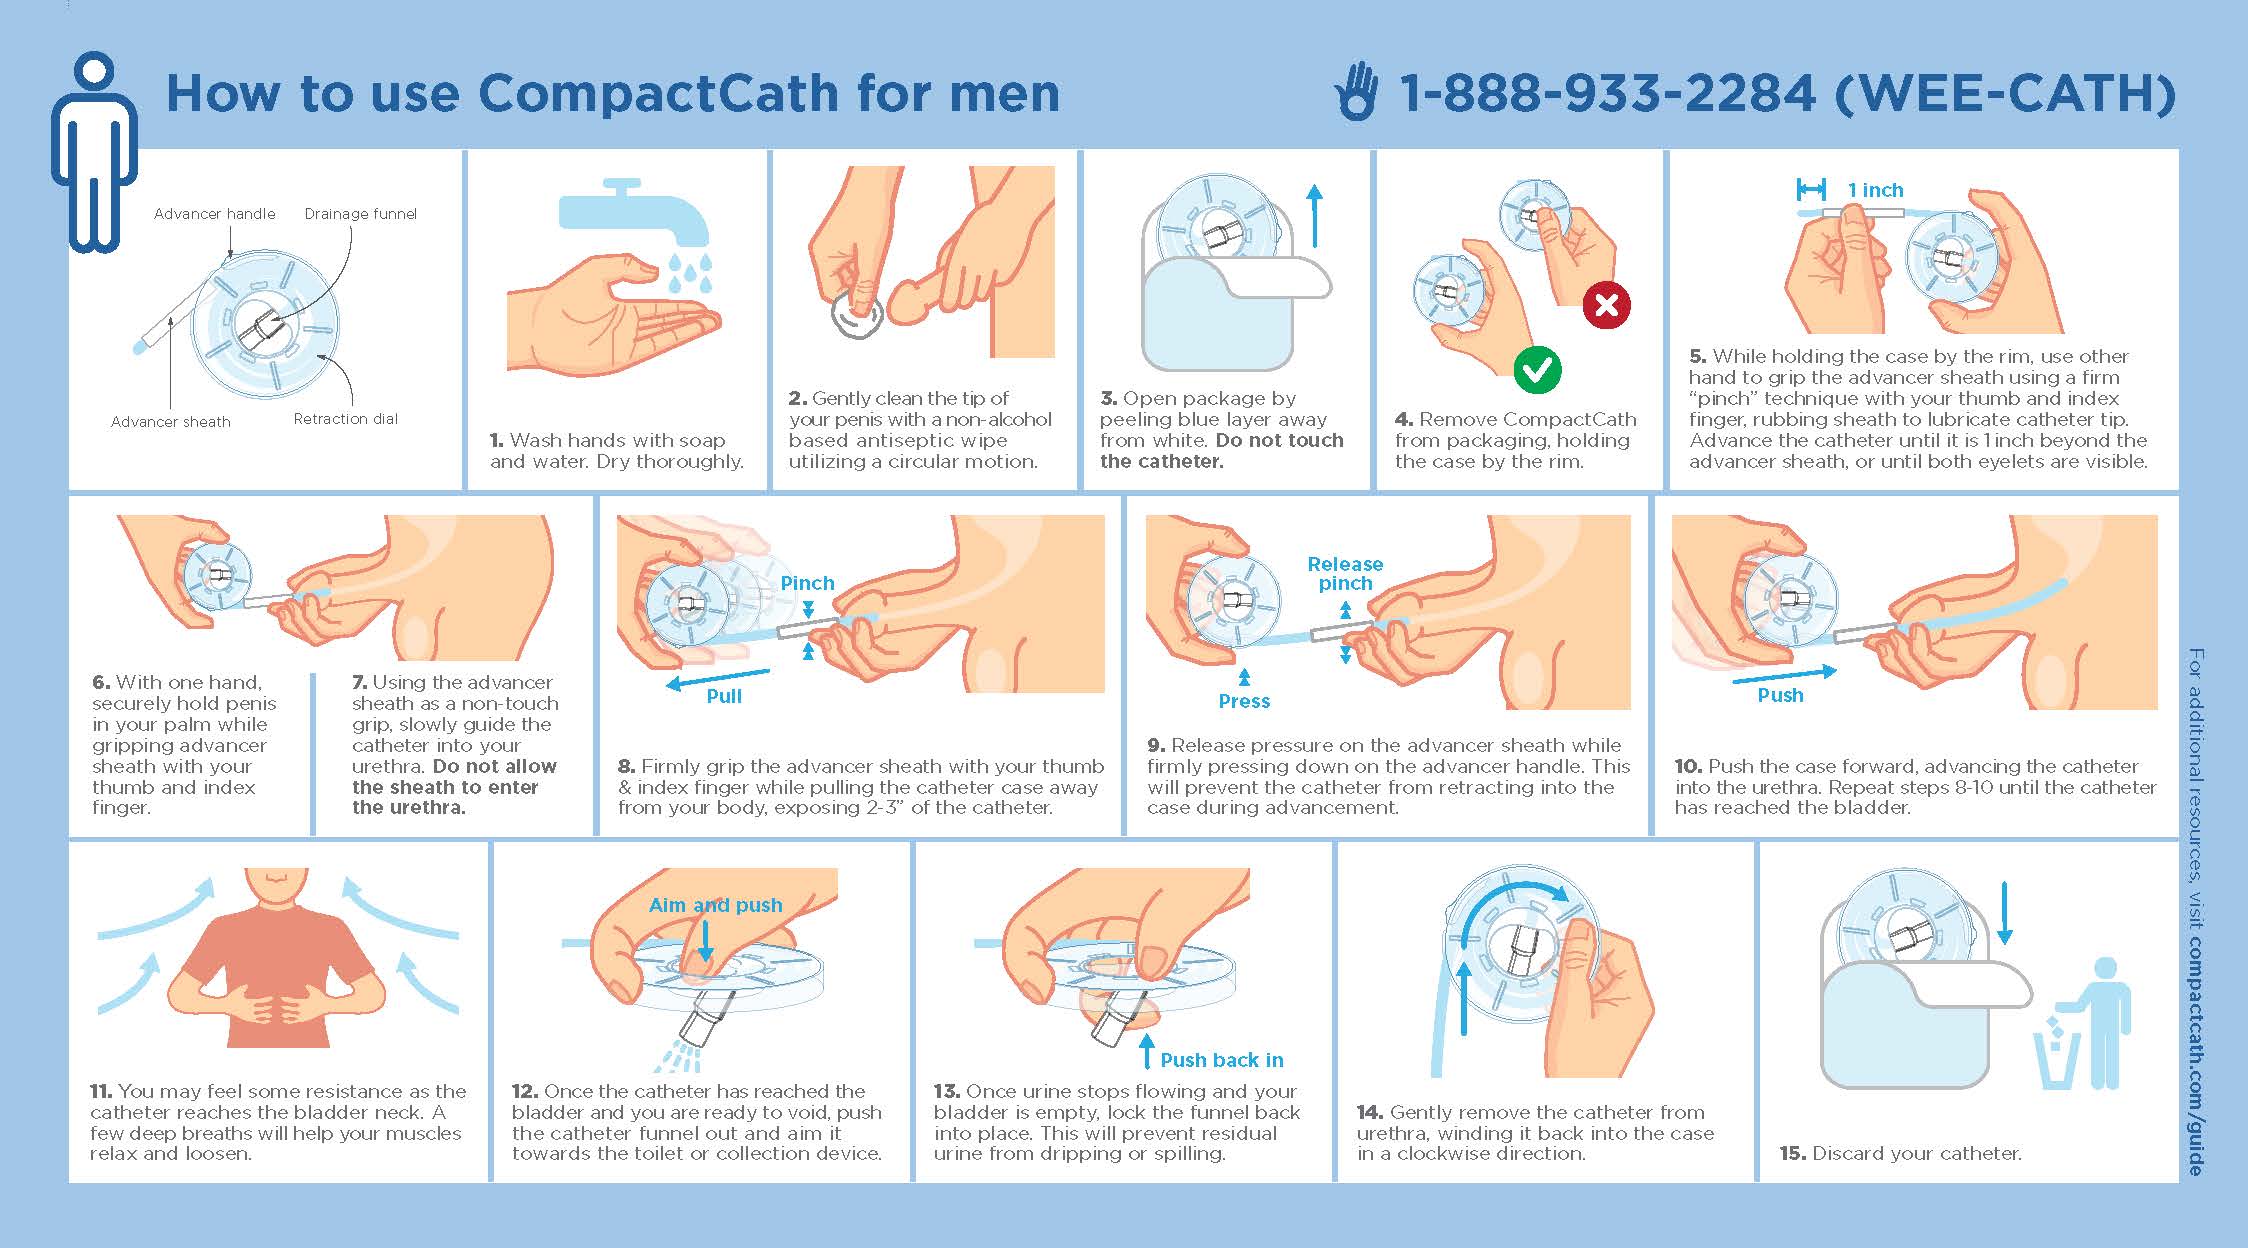 How To Use Catheters Compact Catheter For Men Women